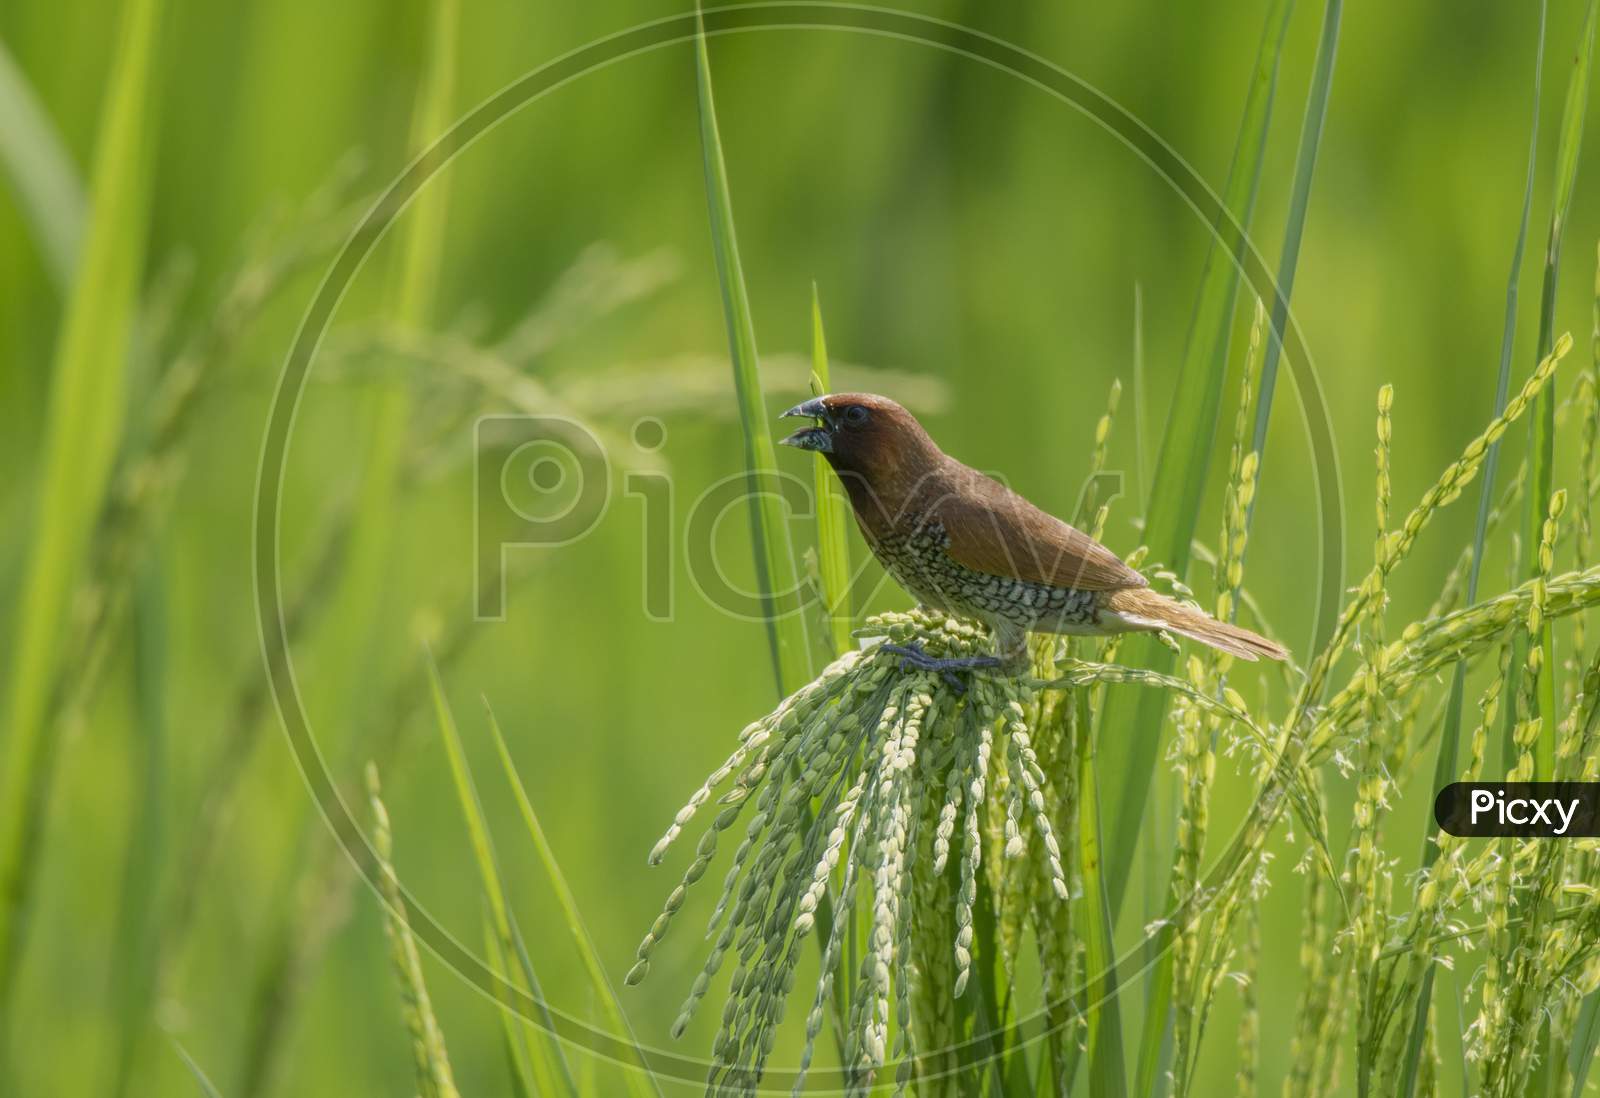 A Small Wild Bird On The The Paddy Tree .